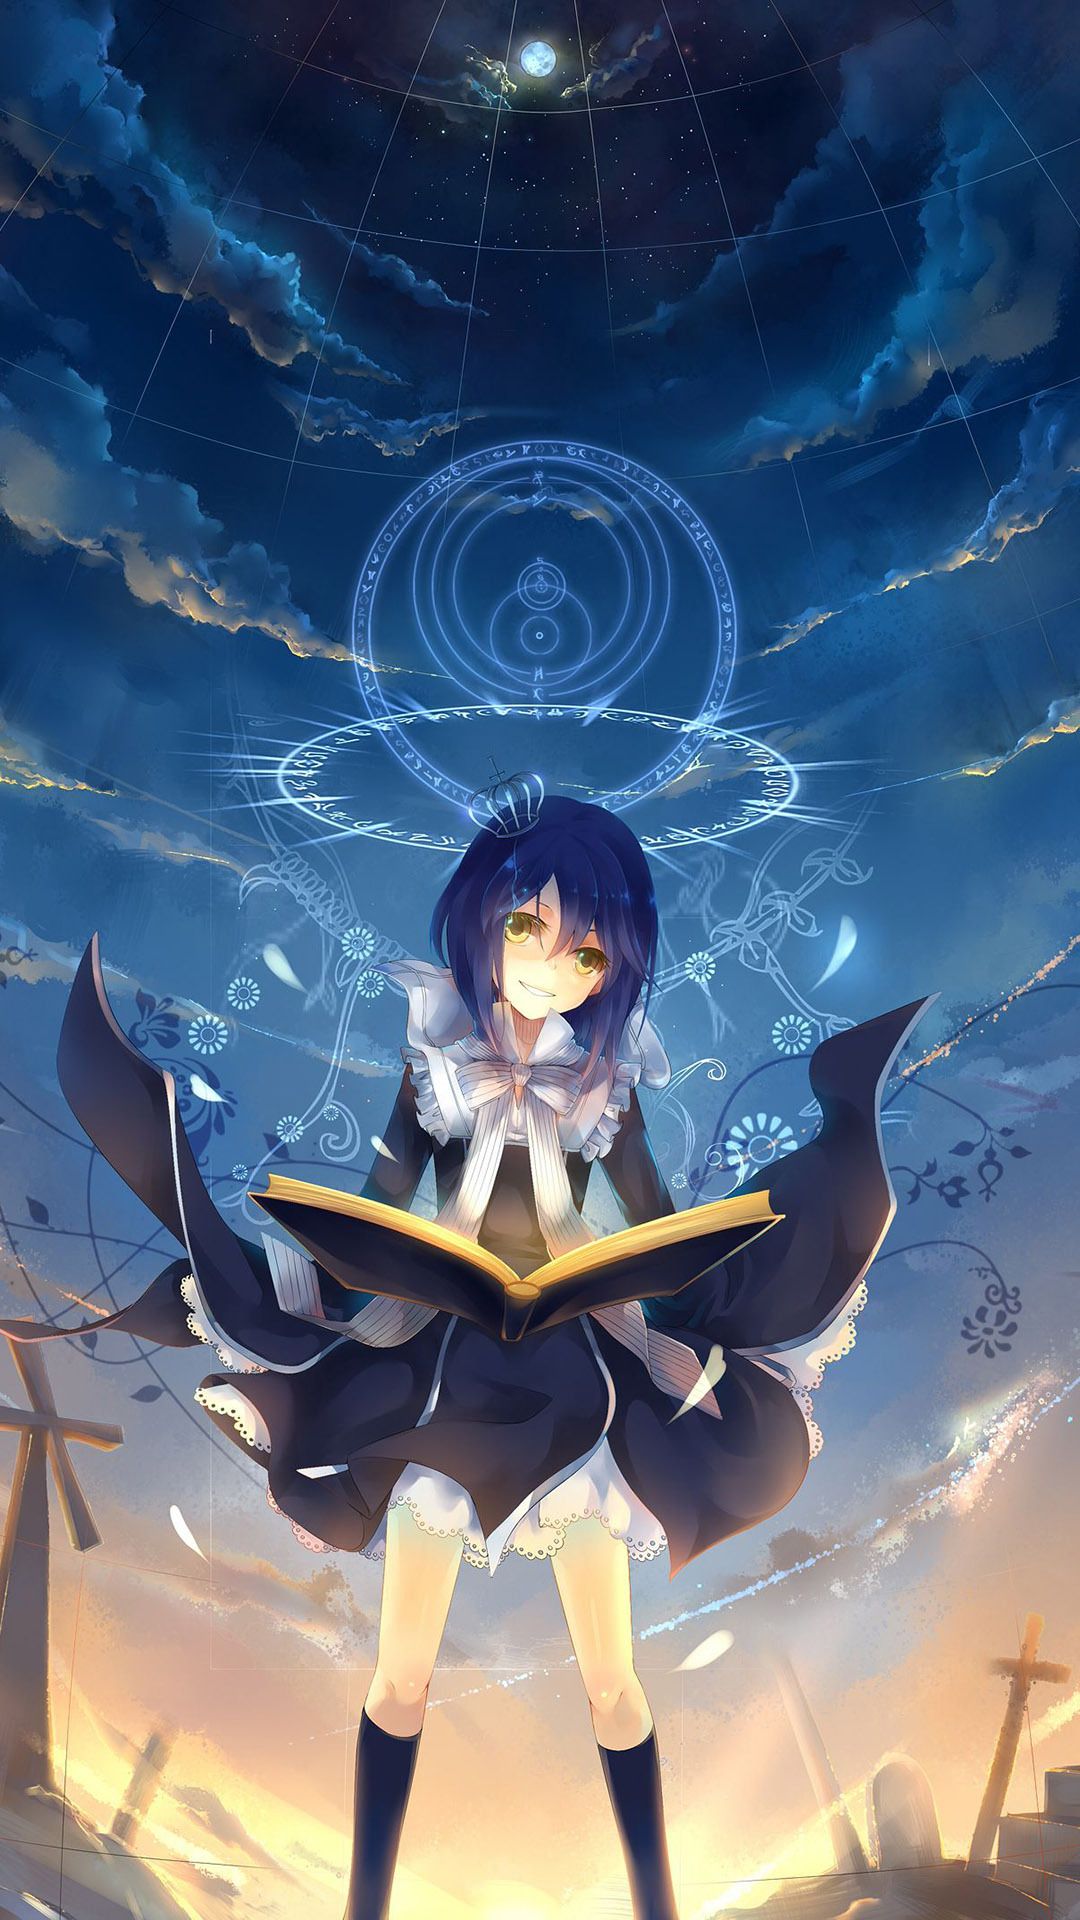 Free download anime witch anime mobile wallpaper 1080x1920 6383 391576114jpg [1080x1920] for your Desktop, Mobile & Tablet. Explore Anime Mobile Wallpaper. Cool Anime Wallpaper, Anime HD Wallpaper, Free Anime Wallpaper for Laptops